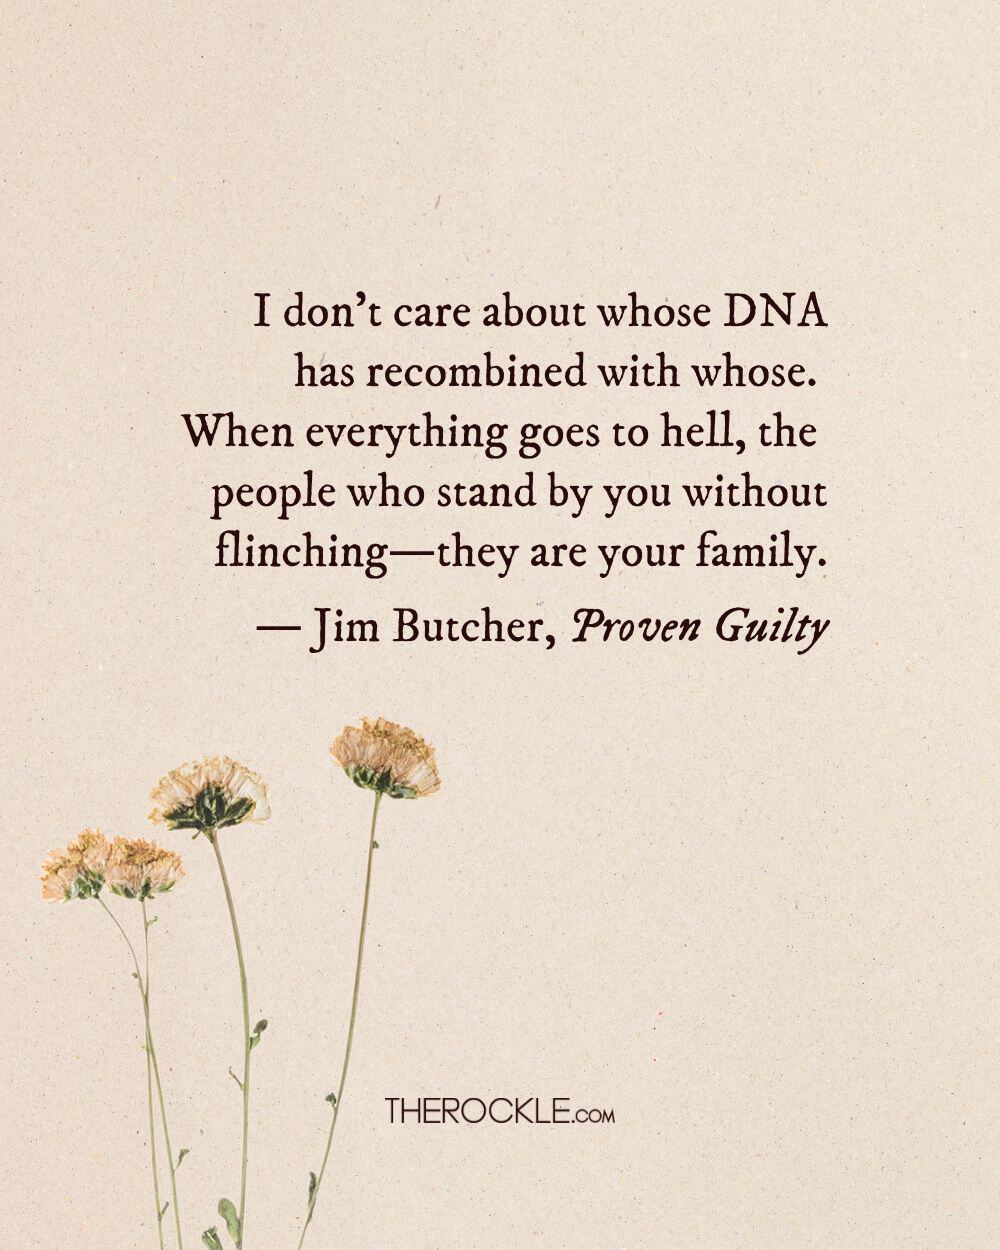 Jim Butcher quote on friendship and support through hard times